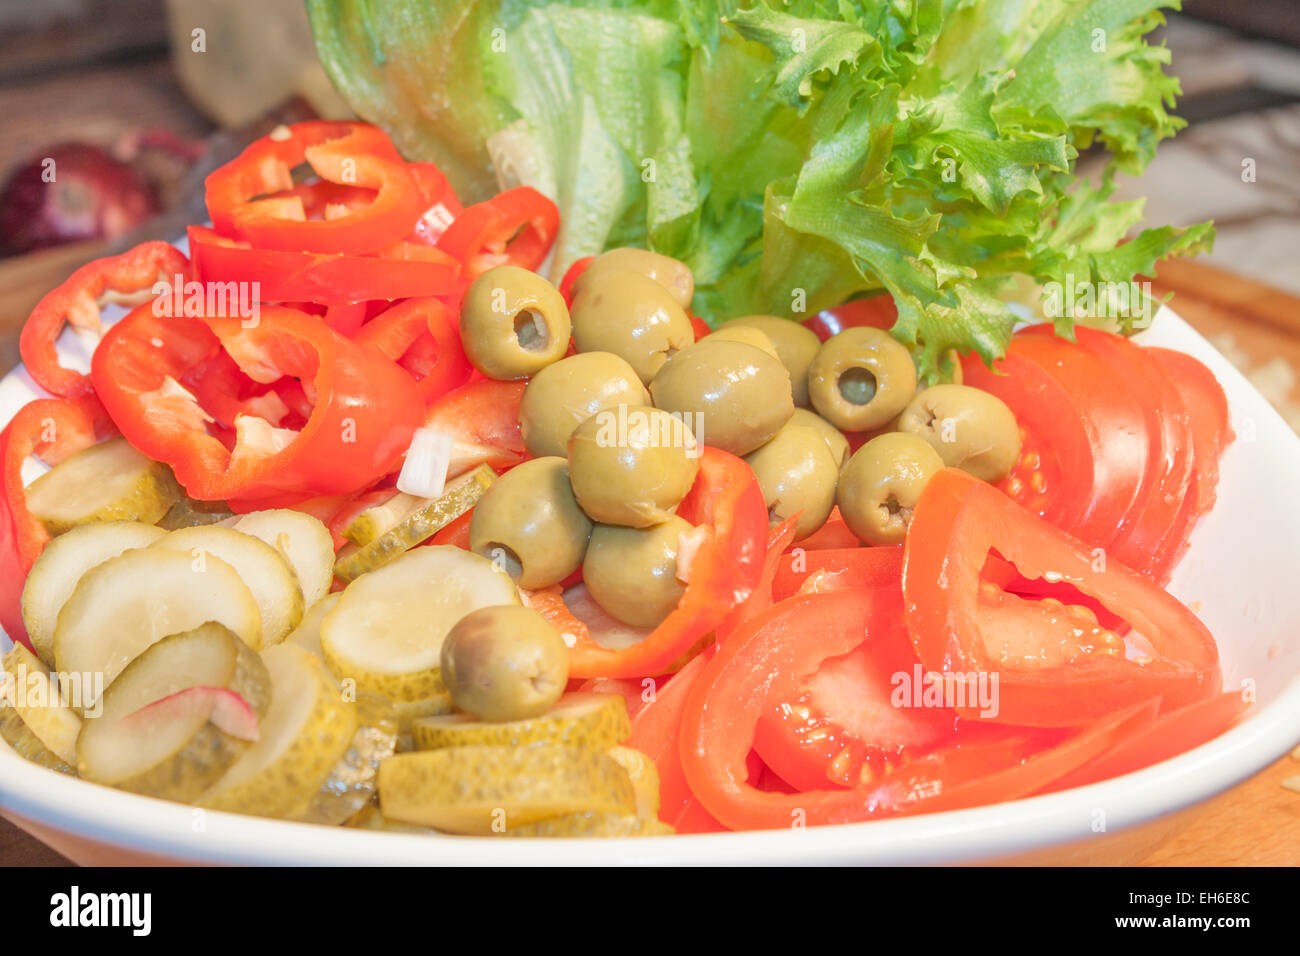 Green olives, between pepper, pickle, salad and tomatoes Stock Photo